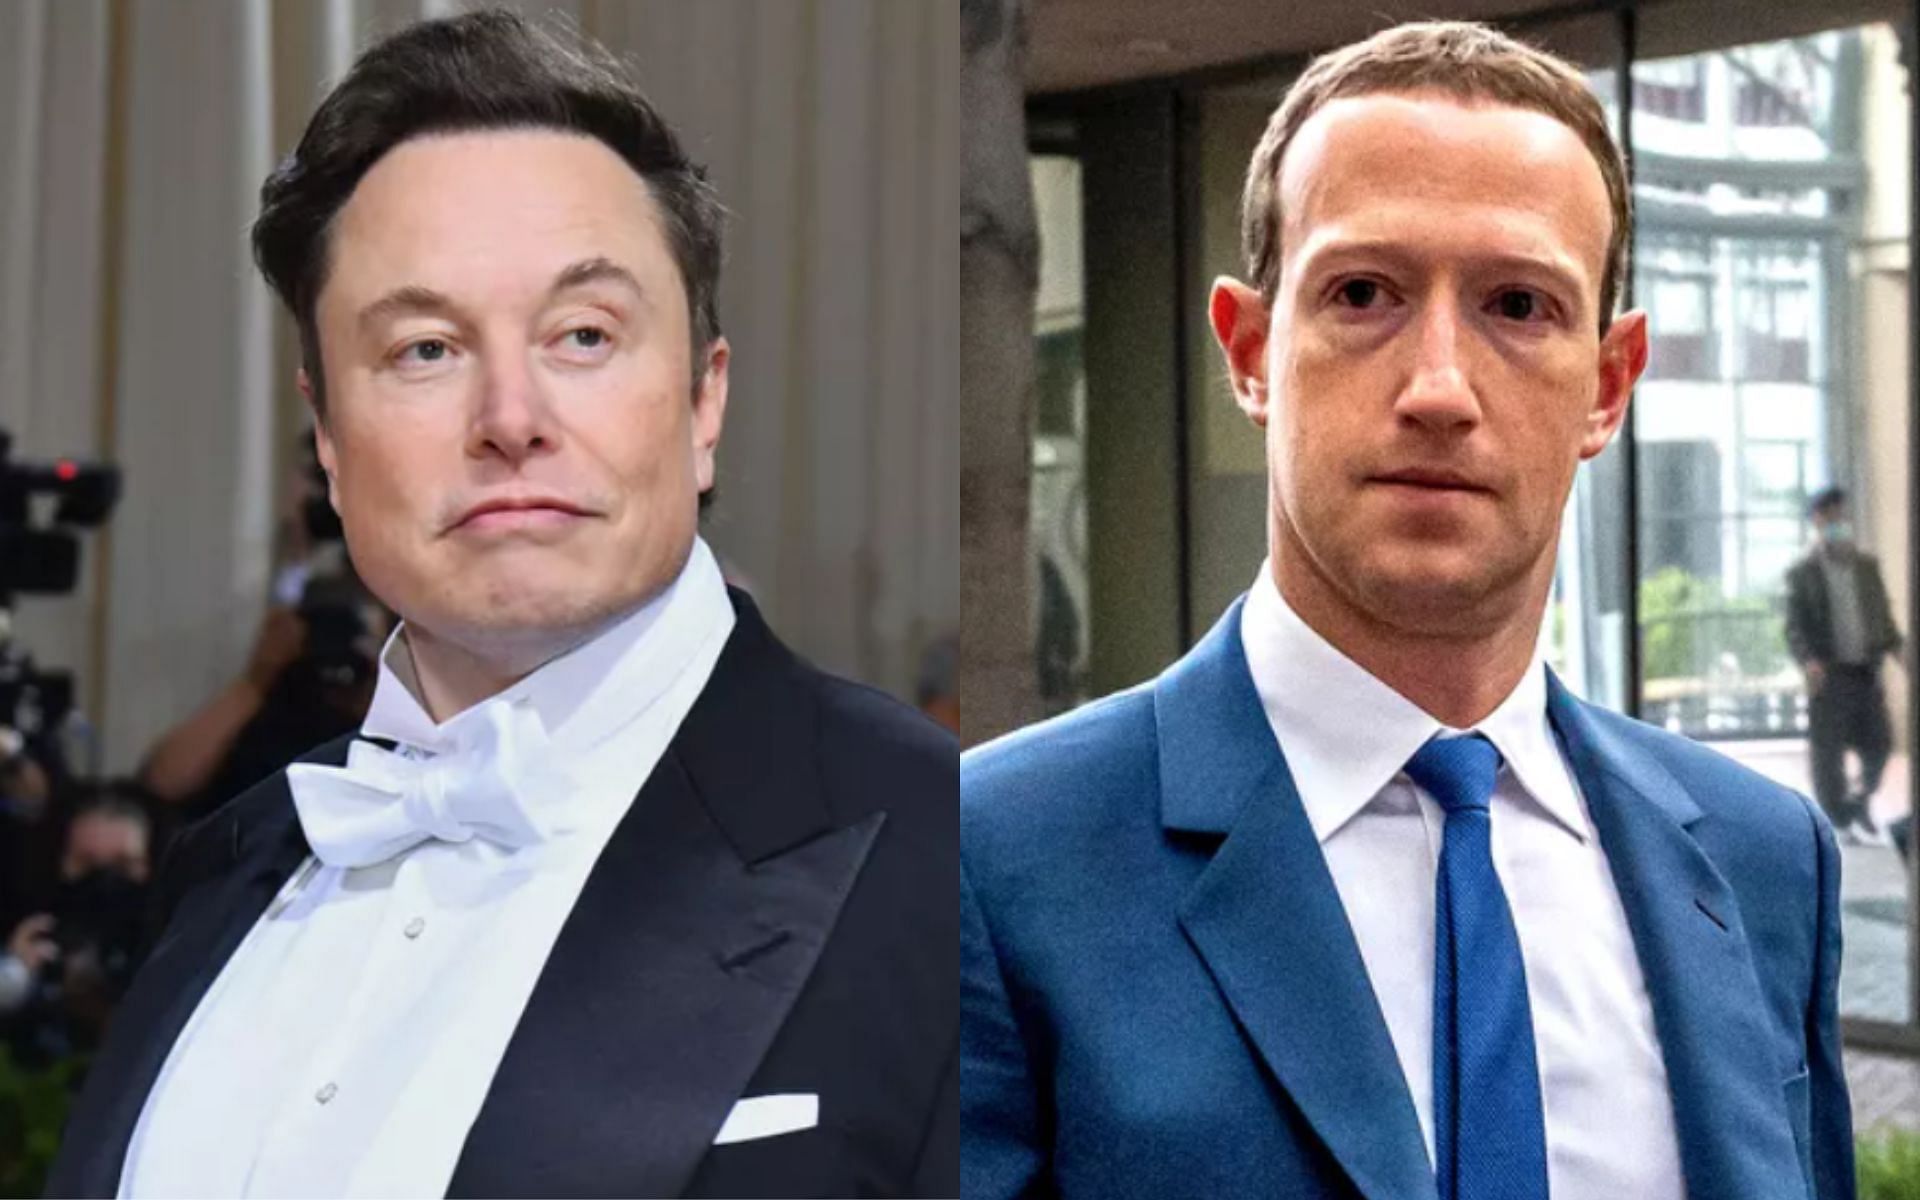 Elon Musk (Left) and Mark Zuckerberg (Right) [*Image courtesy: left and right images via People]